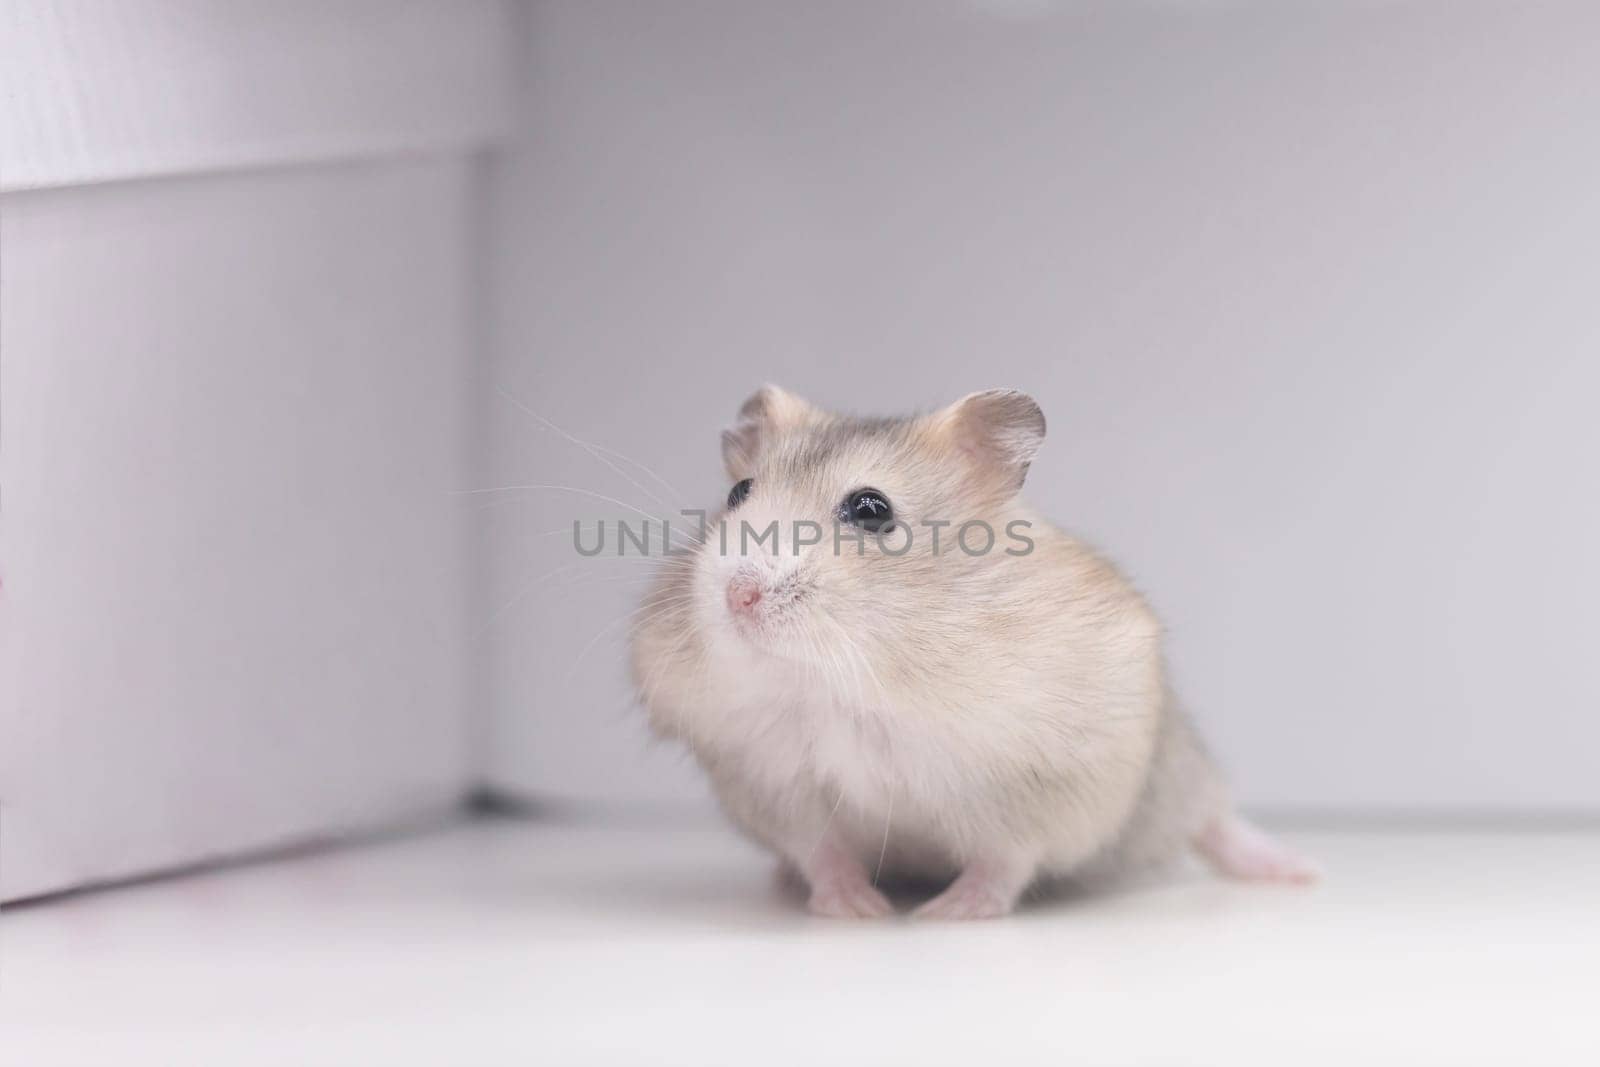 peach hamster looking up on a white background, pets